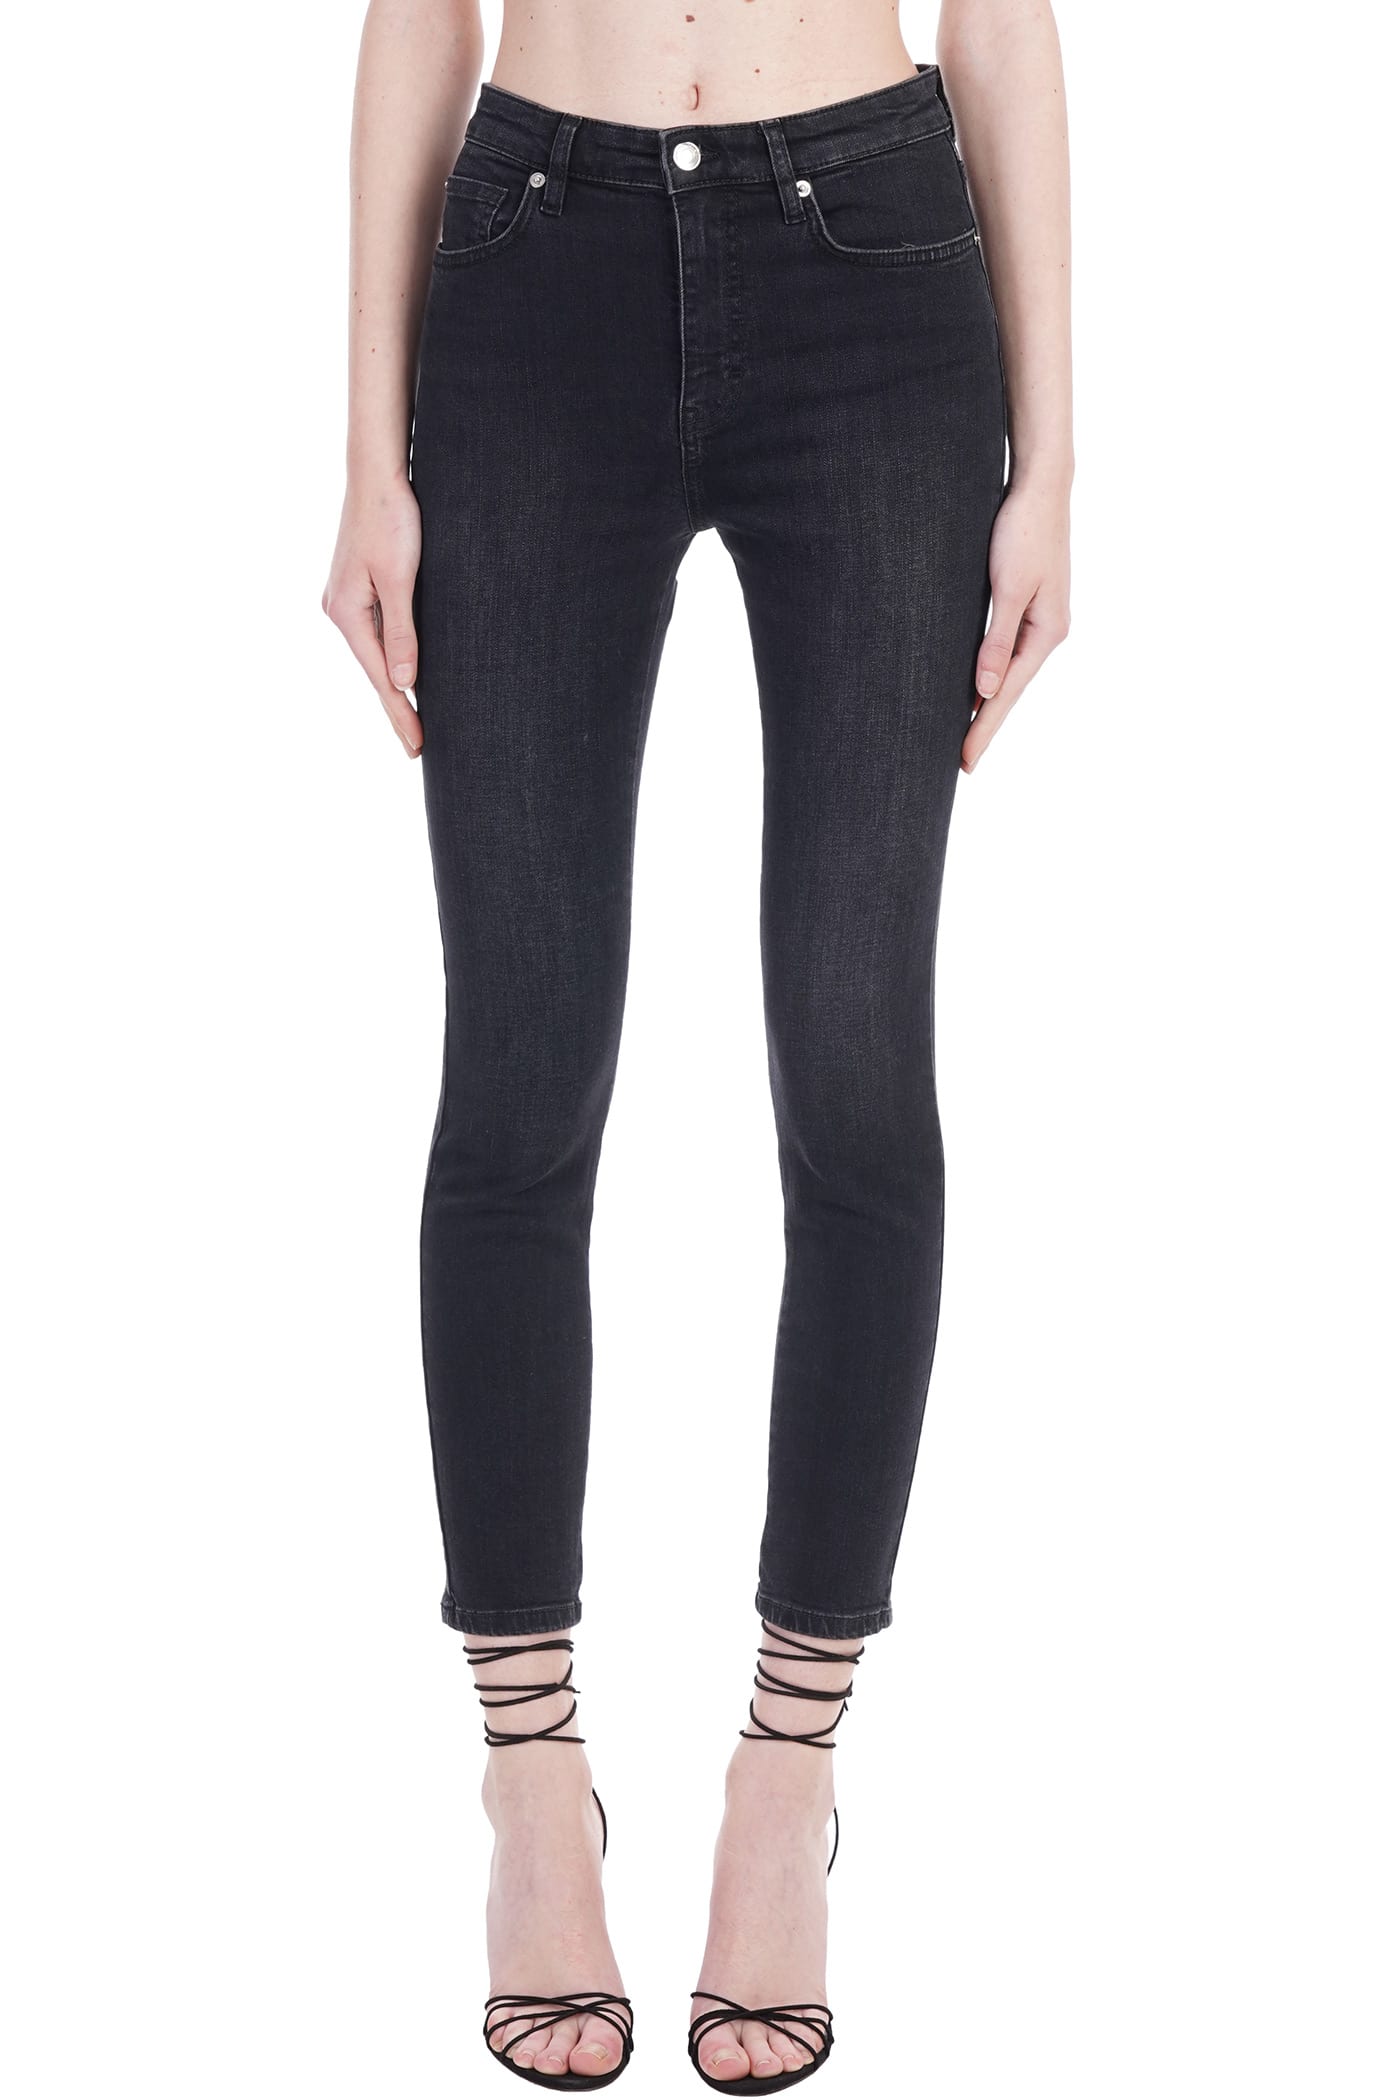 IRO Traccky Jeans In Black Polyester